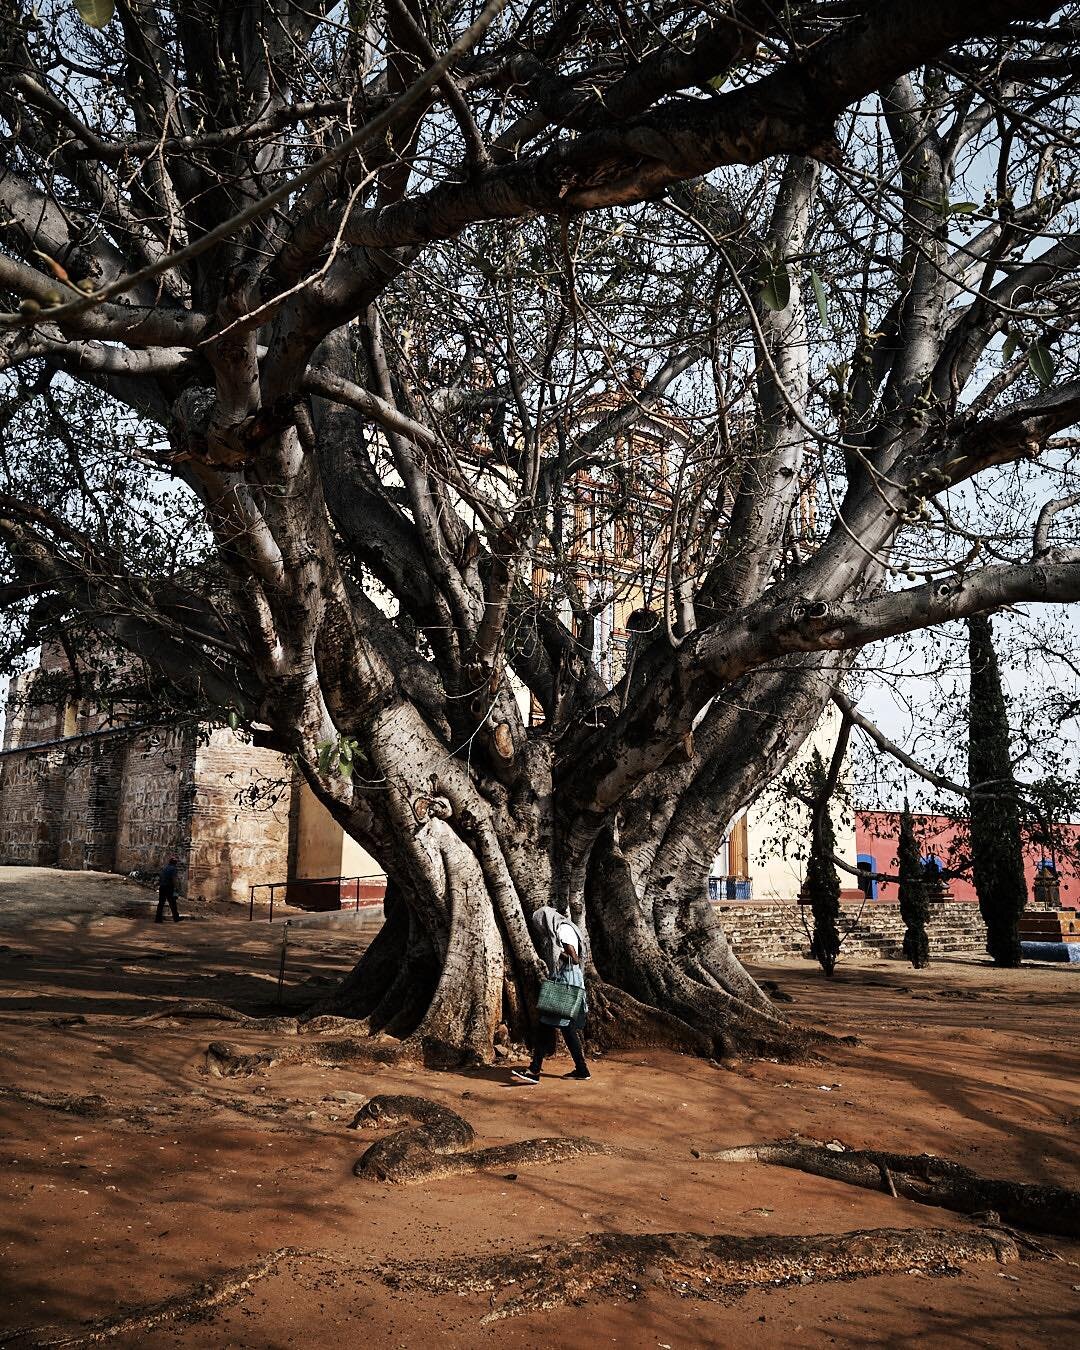 Back from the outskirts of Oaxaca on a production we had the chance to visit the oldest church in the region and I caught this elderly woman walking in front of this old tree. It makes me wonder how long she has known this tree. Does she feel blessed